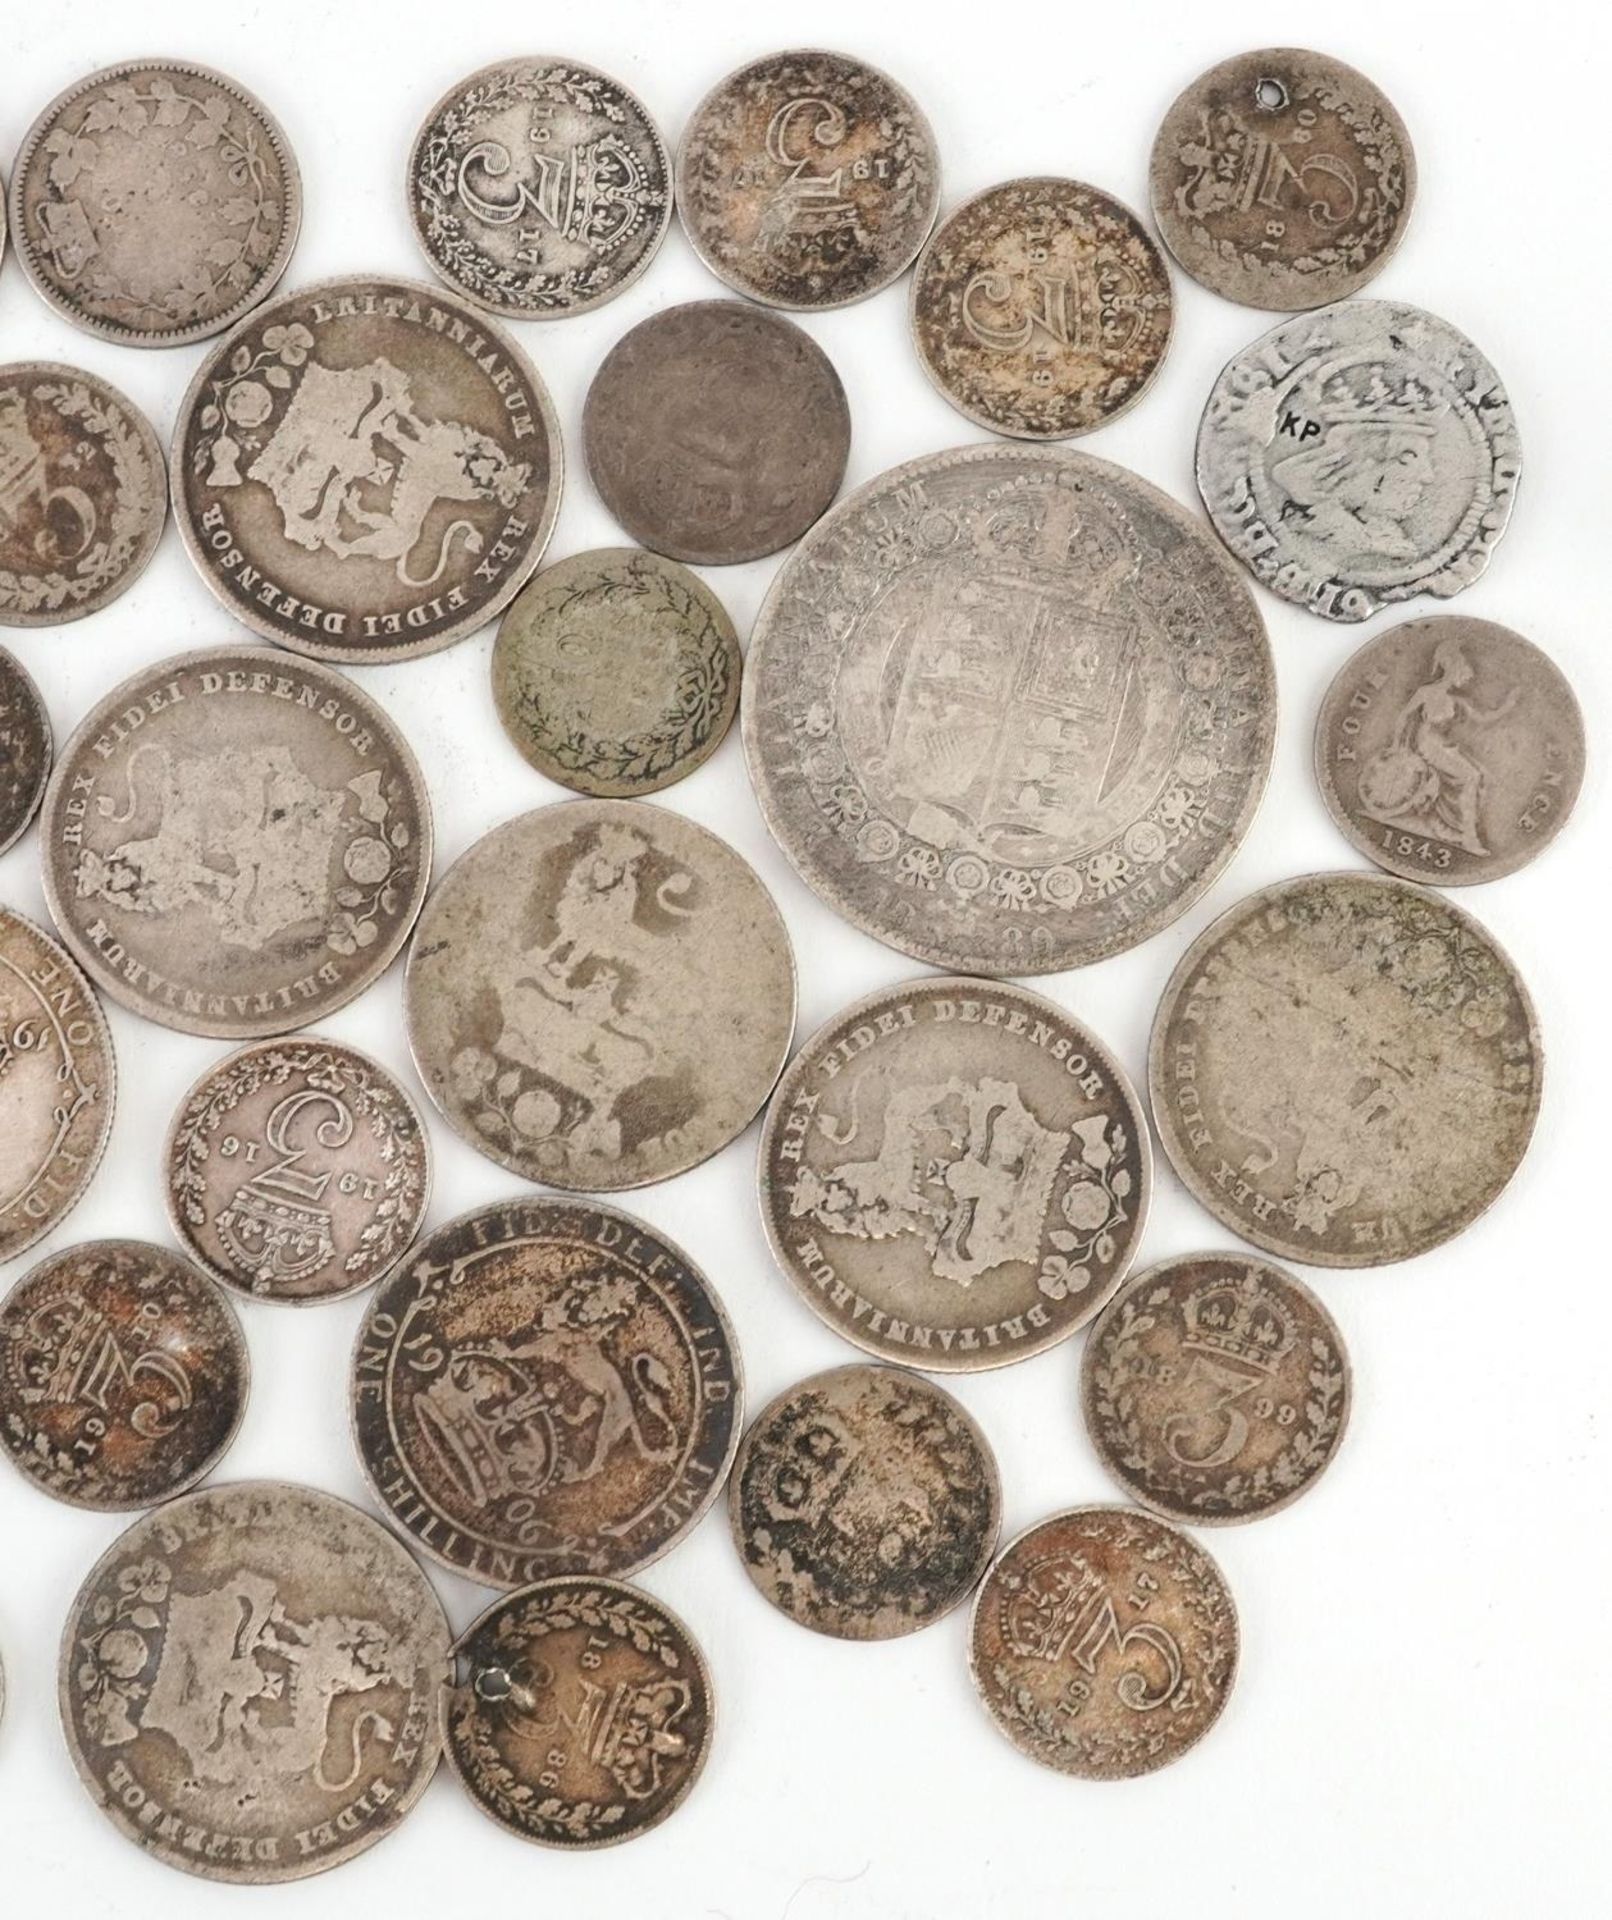 British pre decimal, pre 1947 coinage including half crown and shillings, 120g - Image 3 of 6